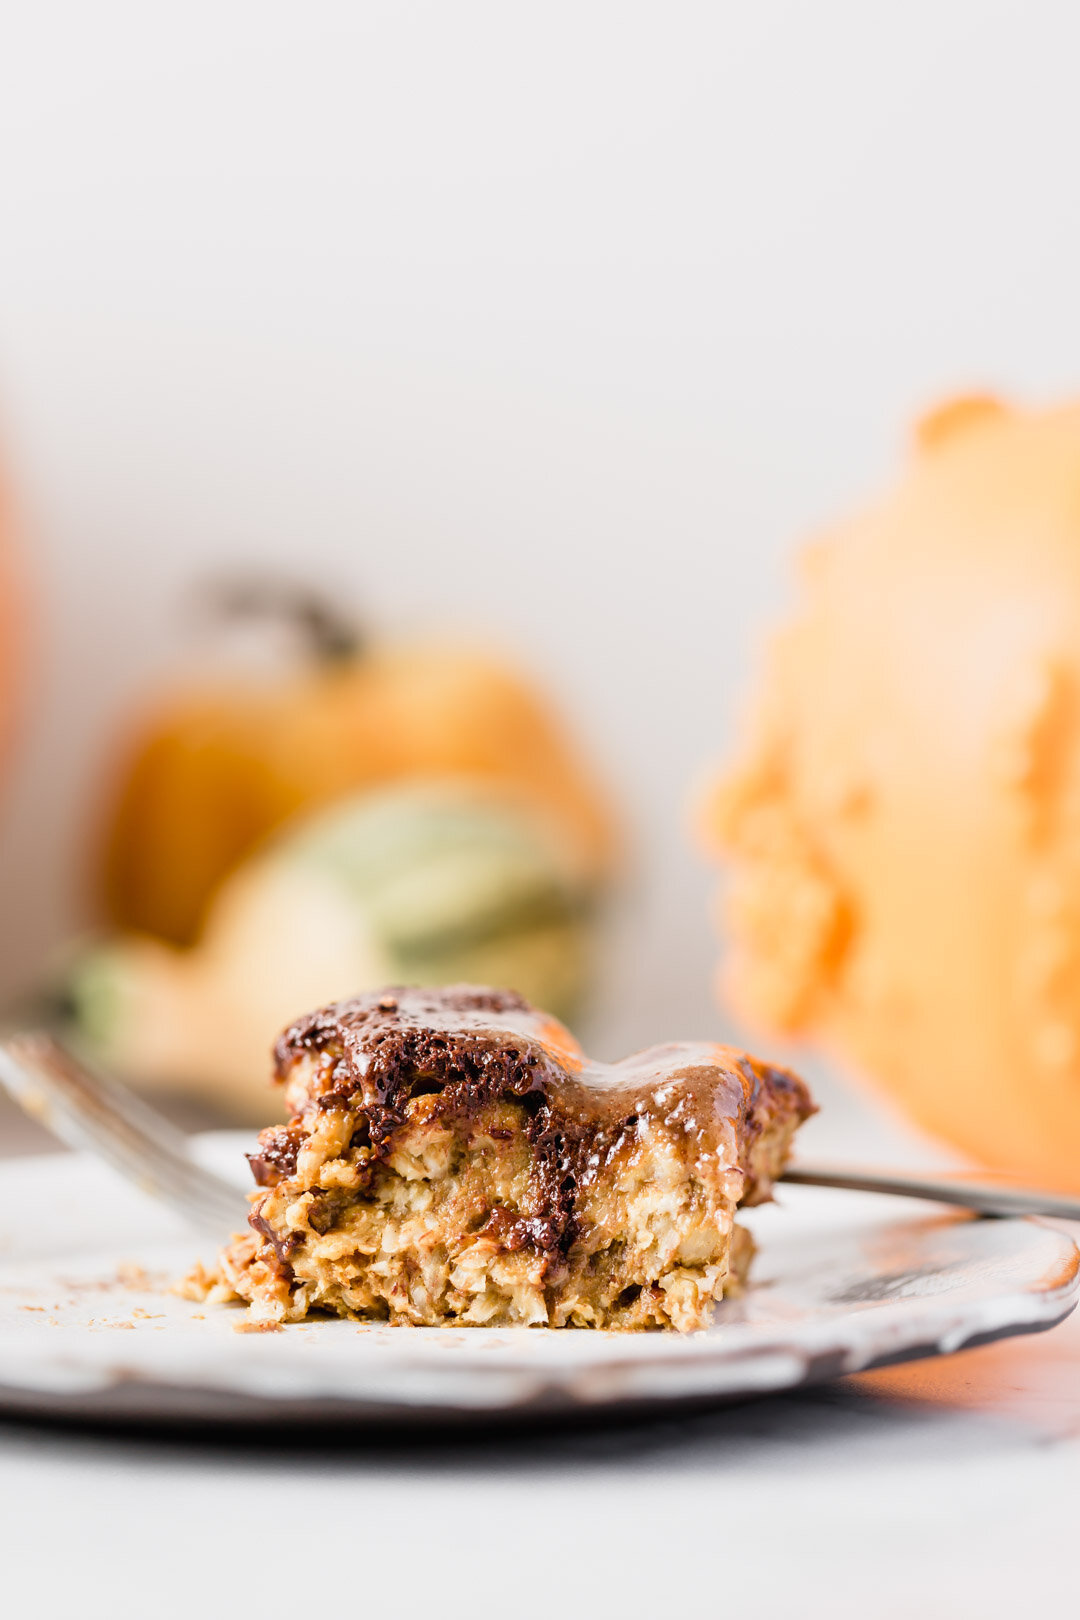 Pumpkin Chocolate Swirl Baked Oatmeal Pudding with Maple Pecan Sauce, Vegan and Gluten-Free